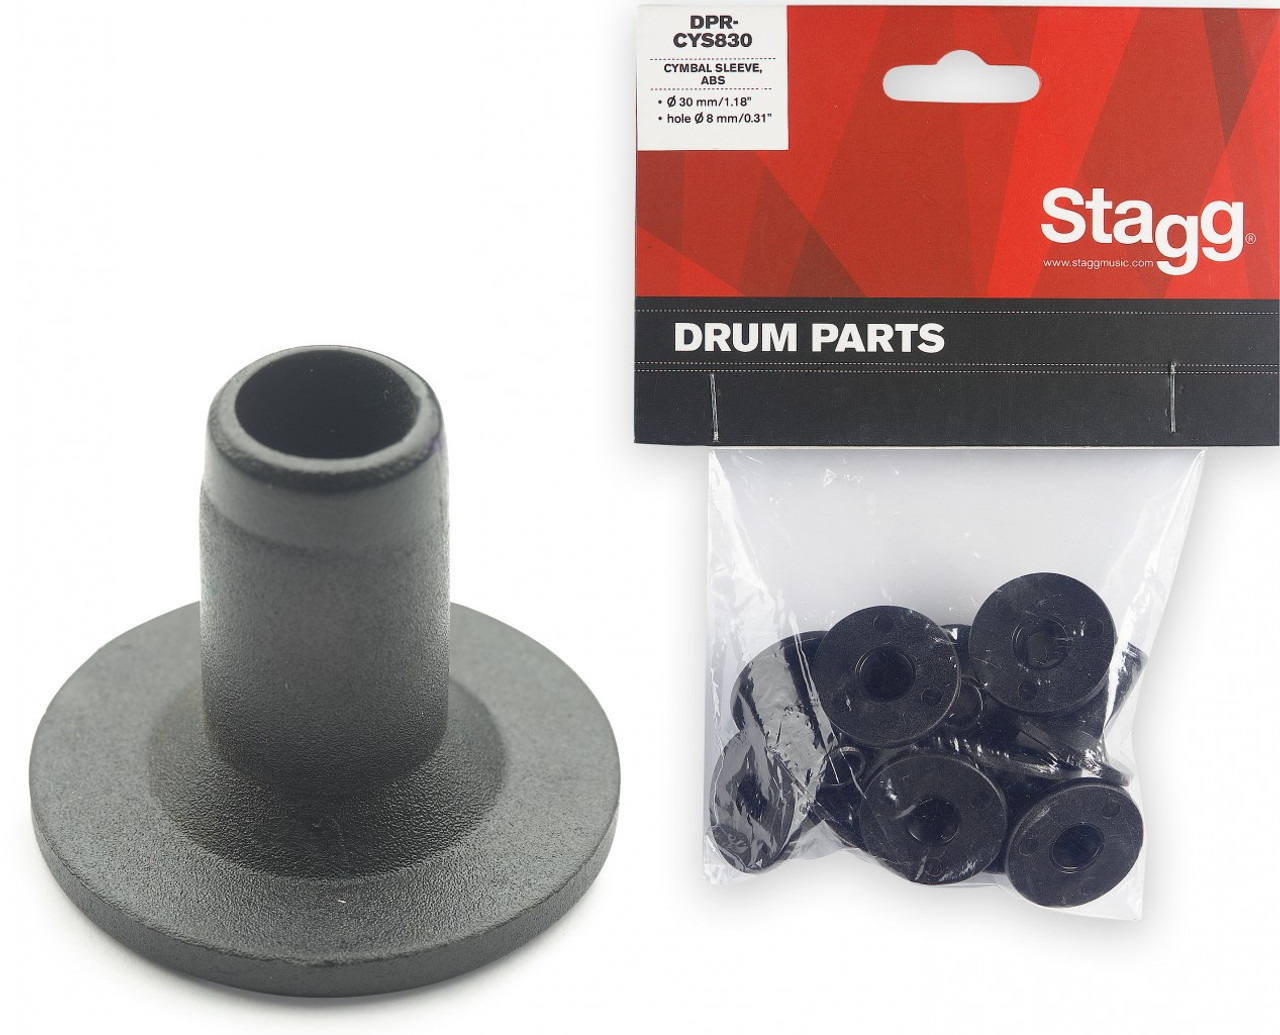 Stagg Cymbal Sleeve Nylon 8mm (10pc)